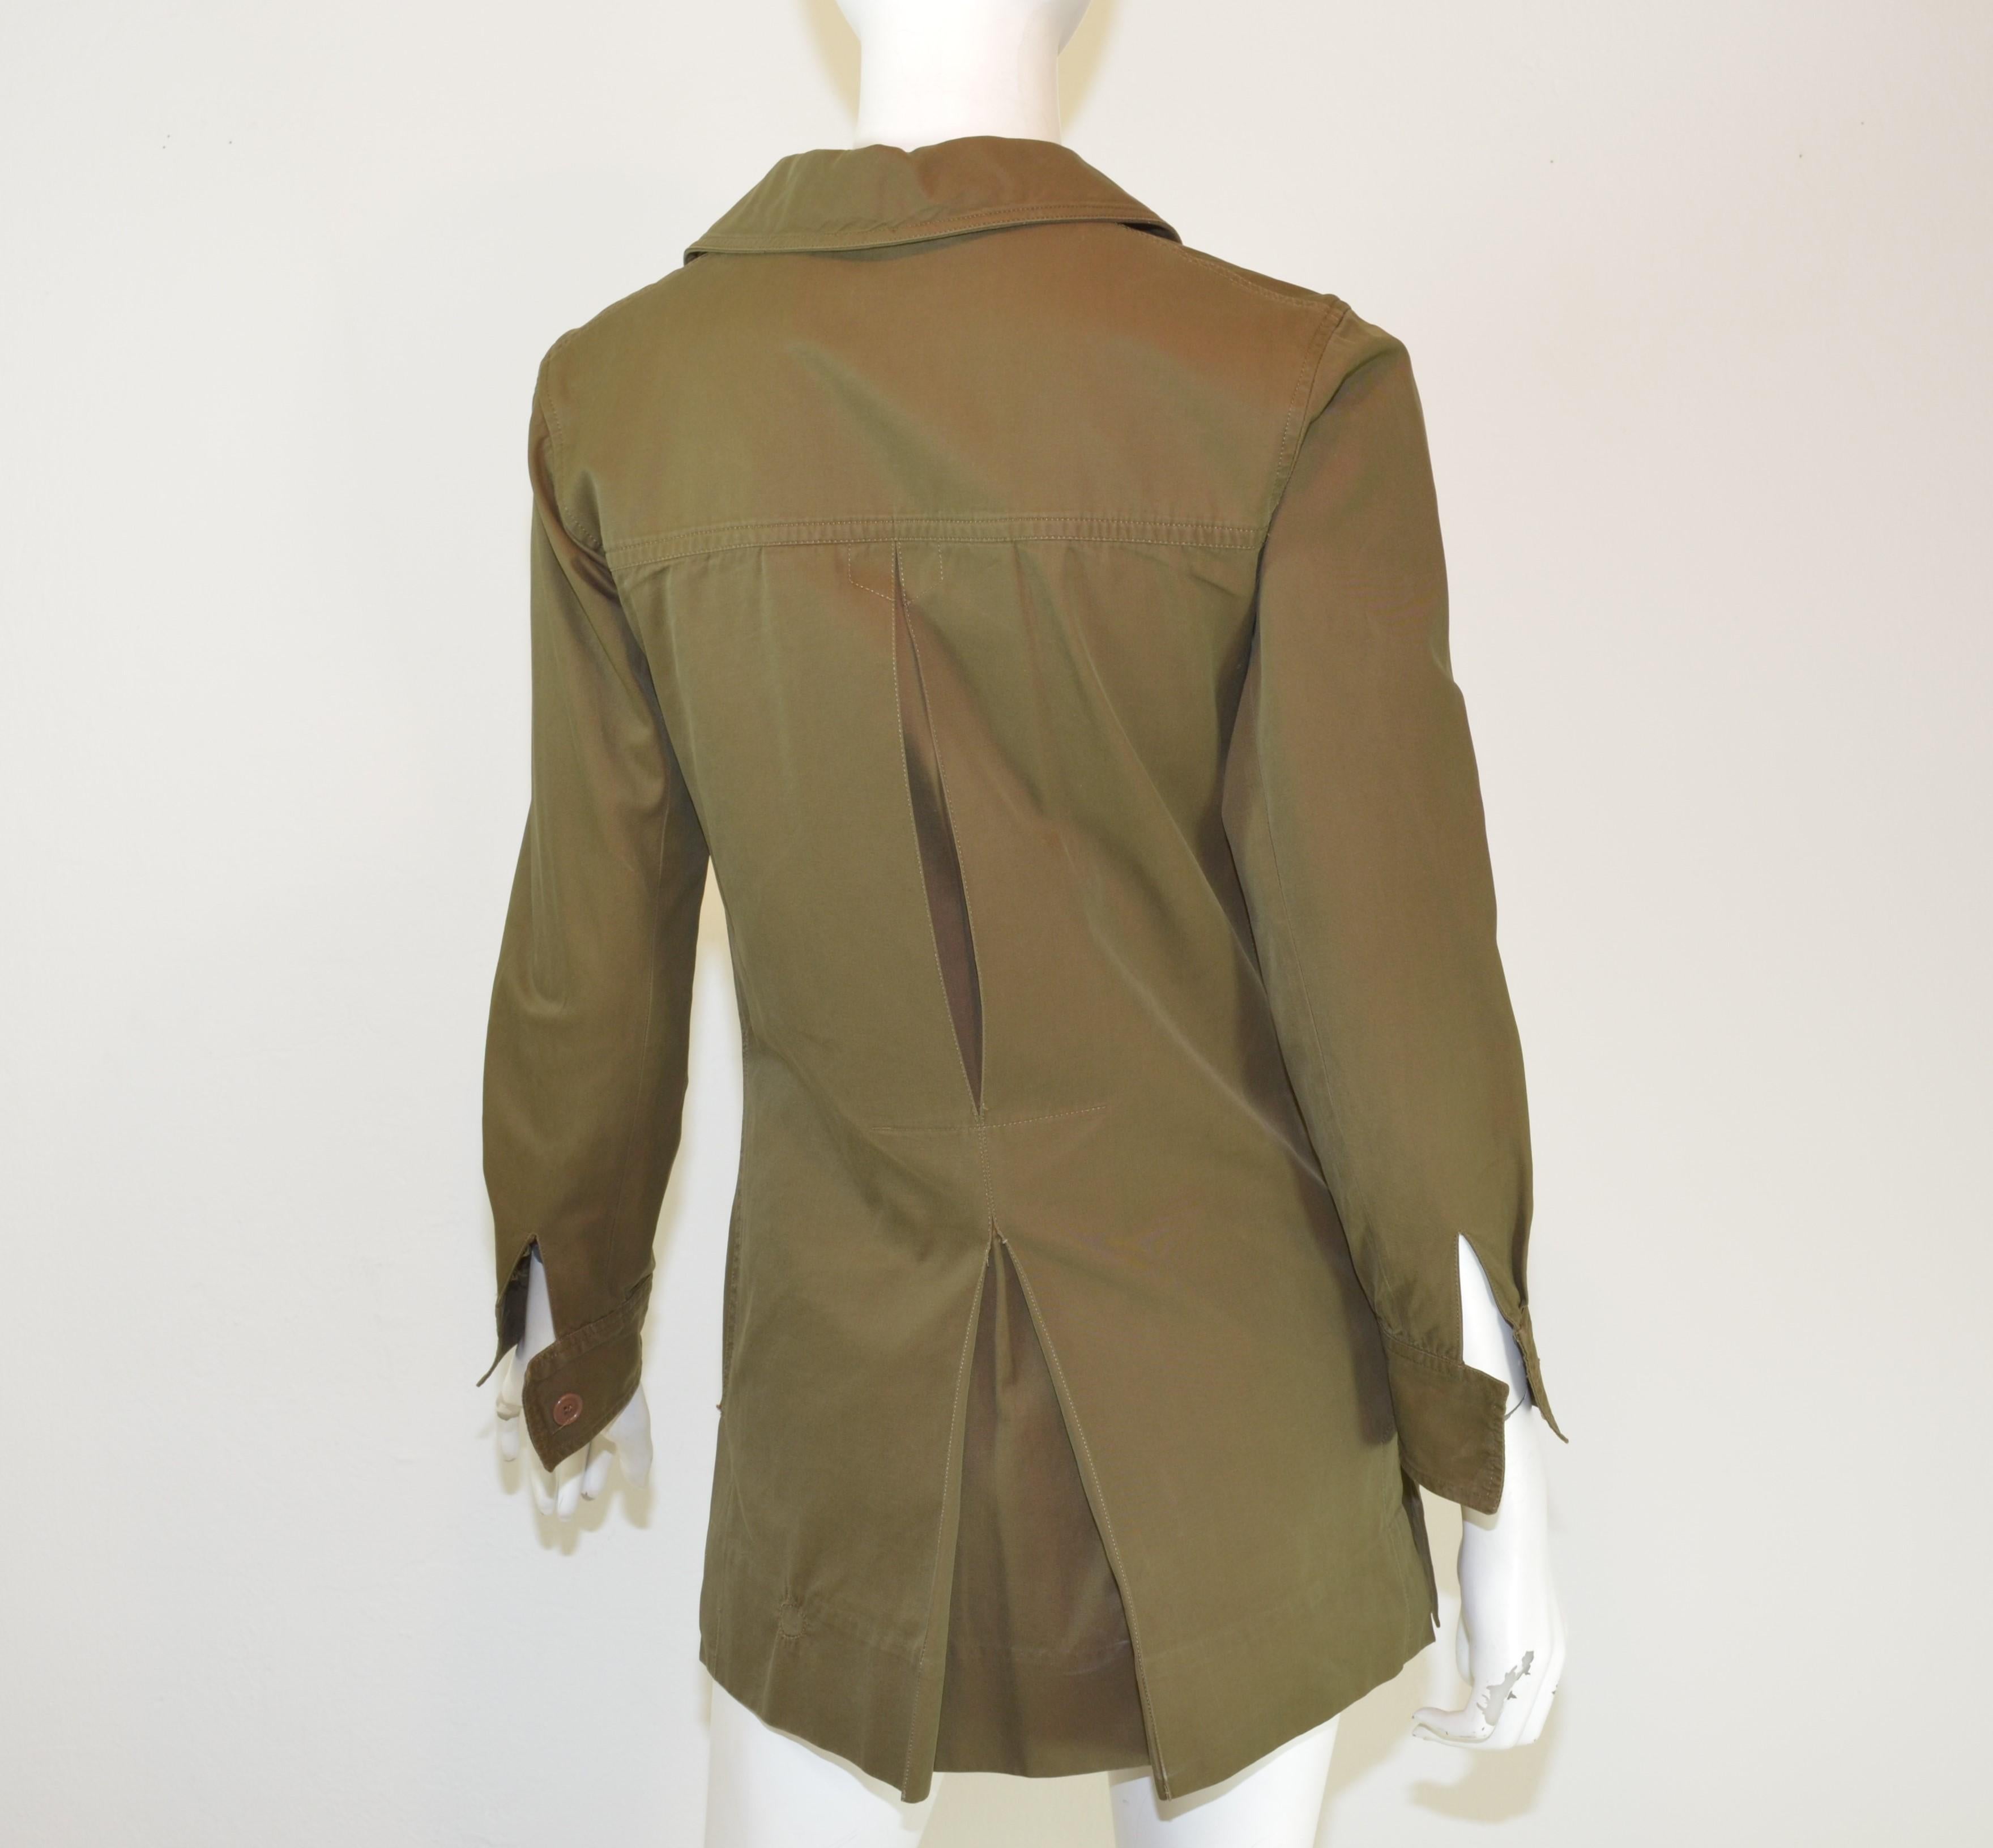 This Yves Saint Laurent vintage safari jacket was gifted to a Parisian model in 1969 and it is featured in an olive green cotton twill with a lace up tie fastening and four functional patch pockets. Jacket has button placements along the cuffs of